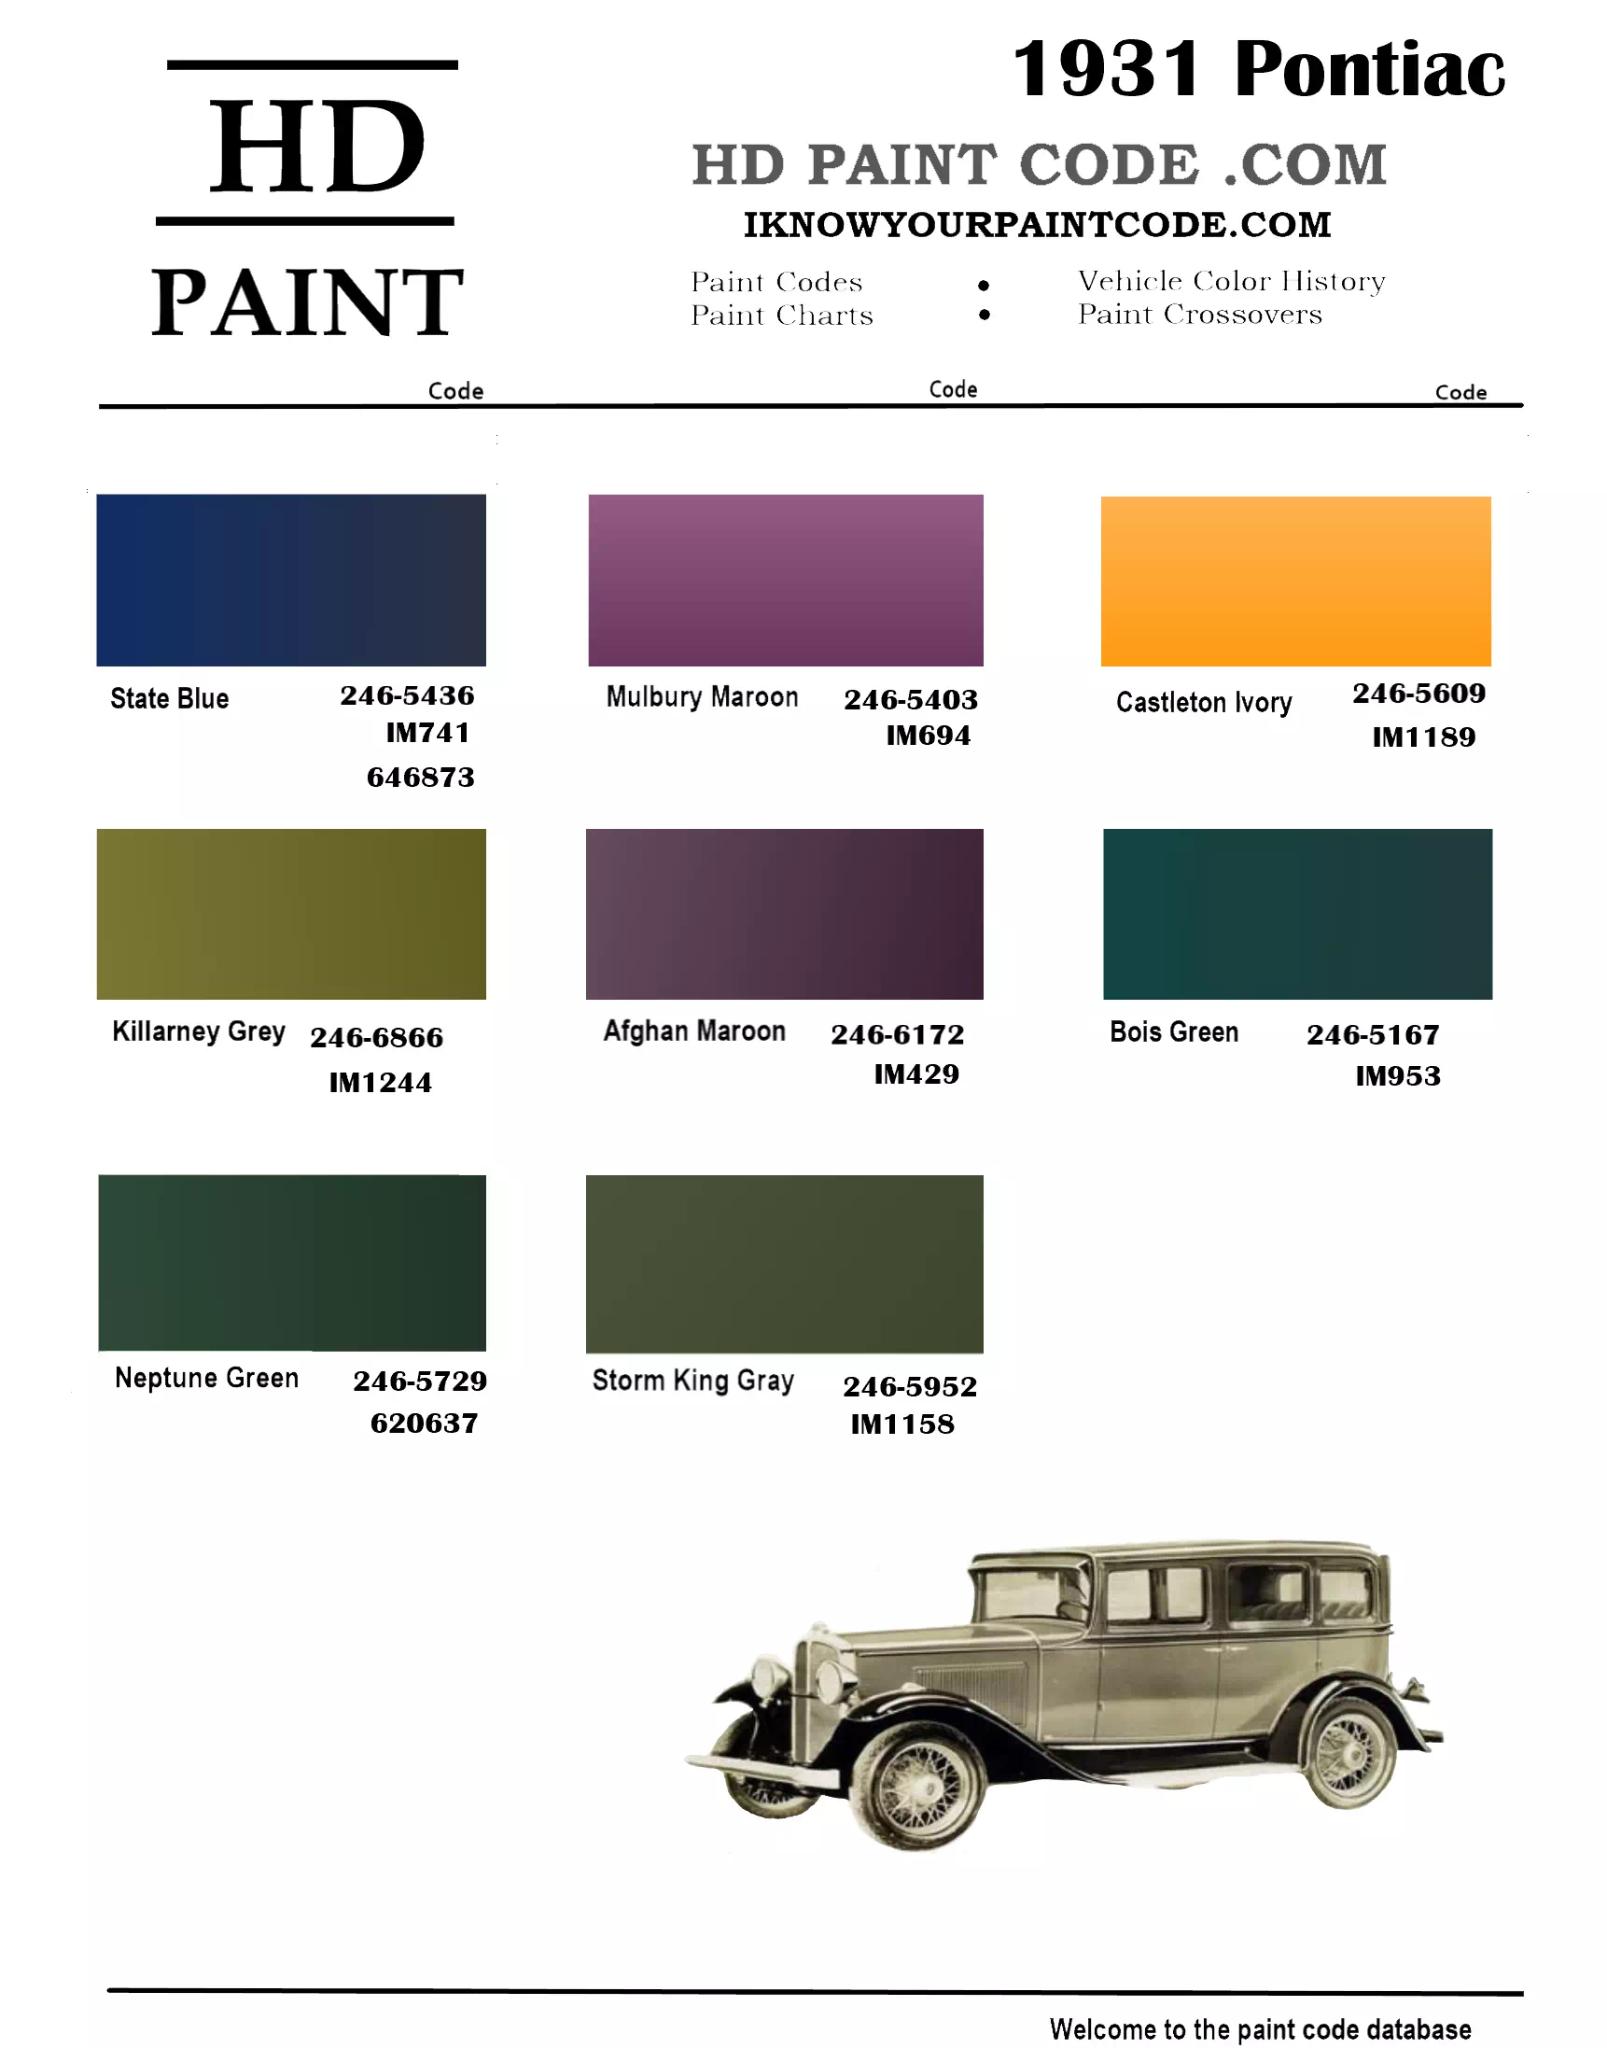 Colors and codes used on Pontiac Vehicles in 1931